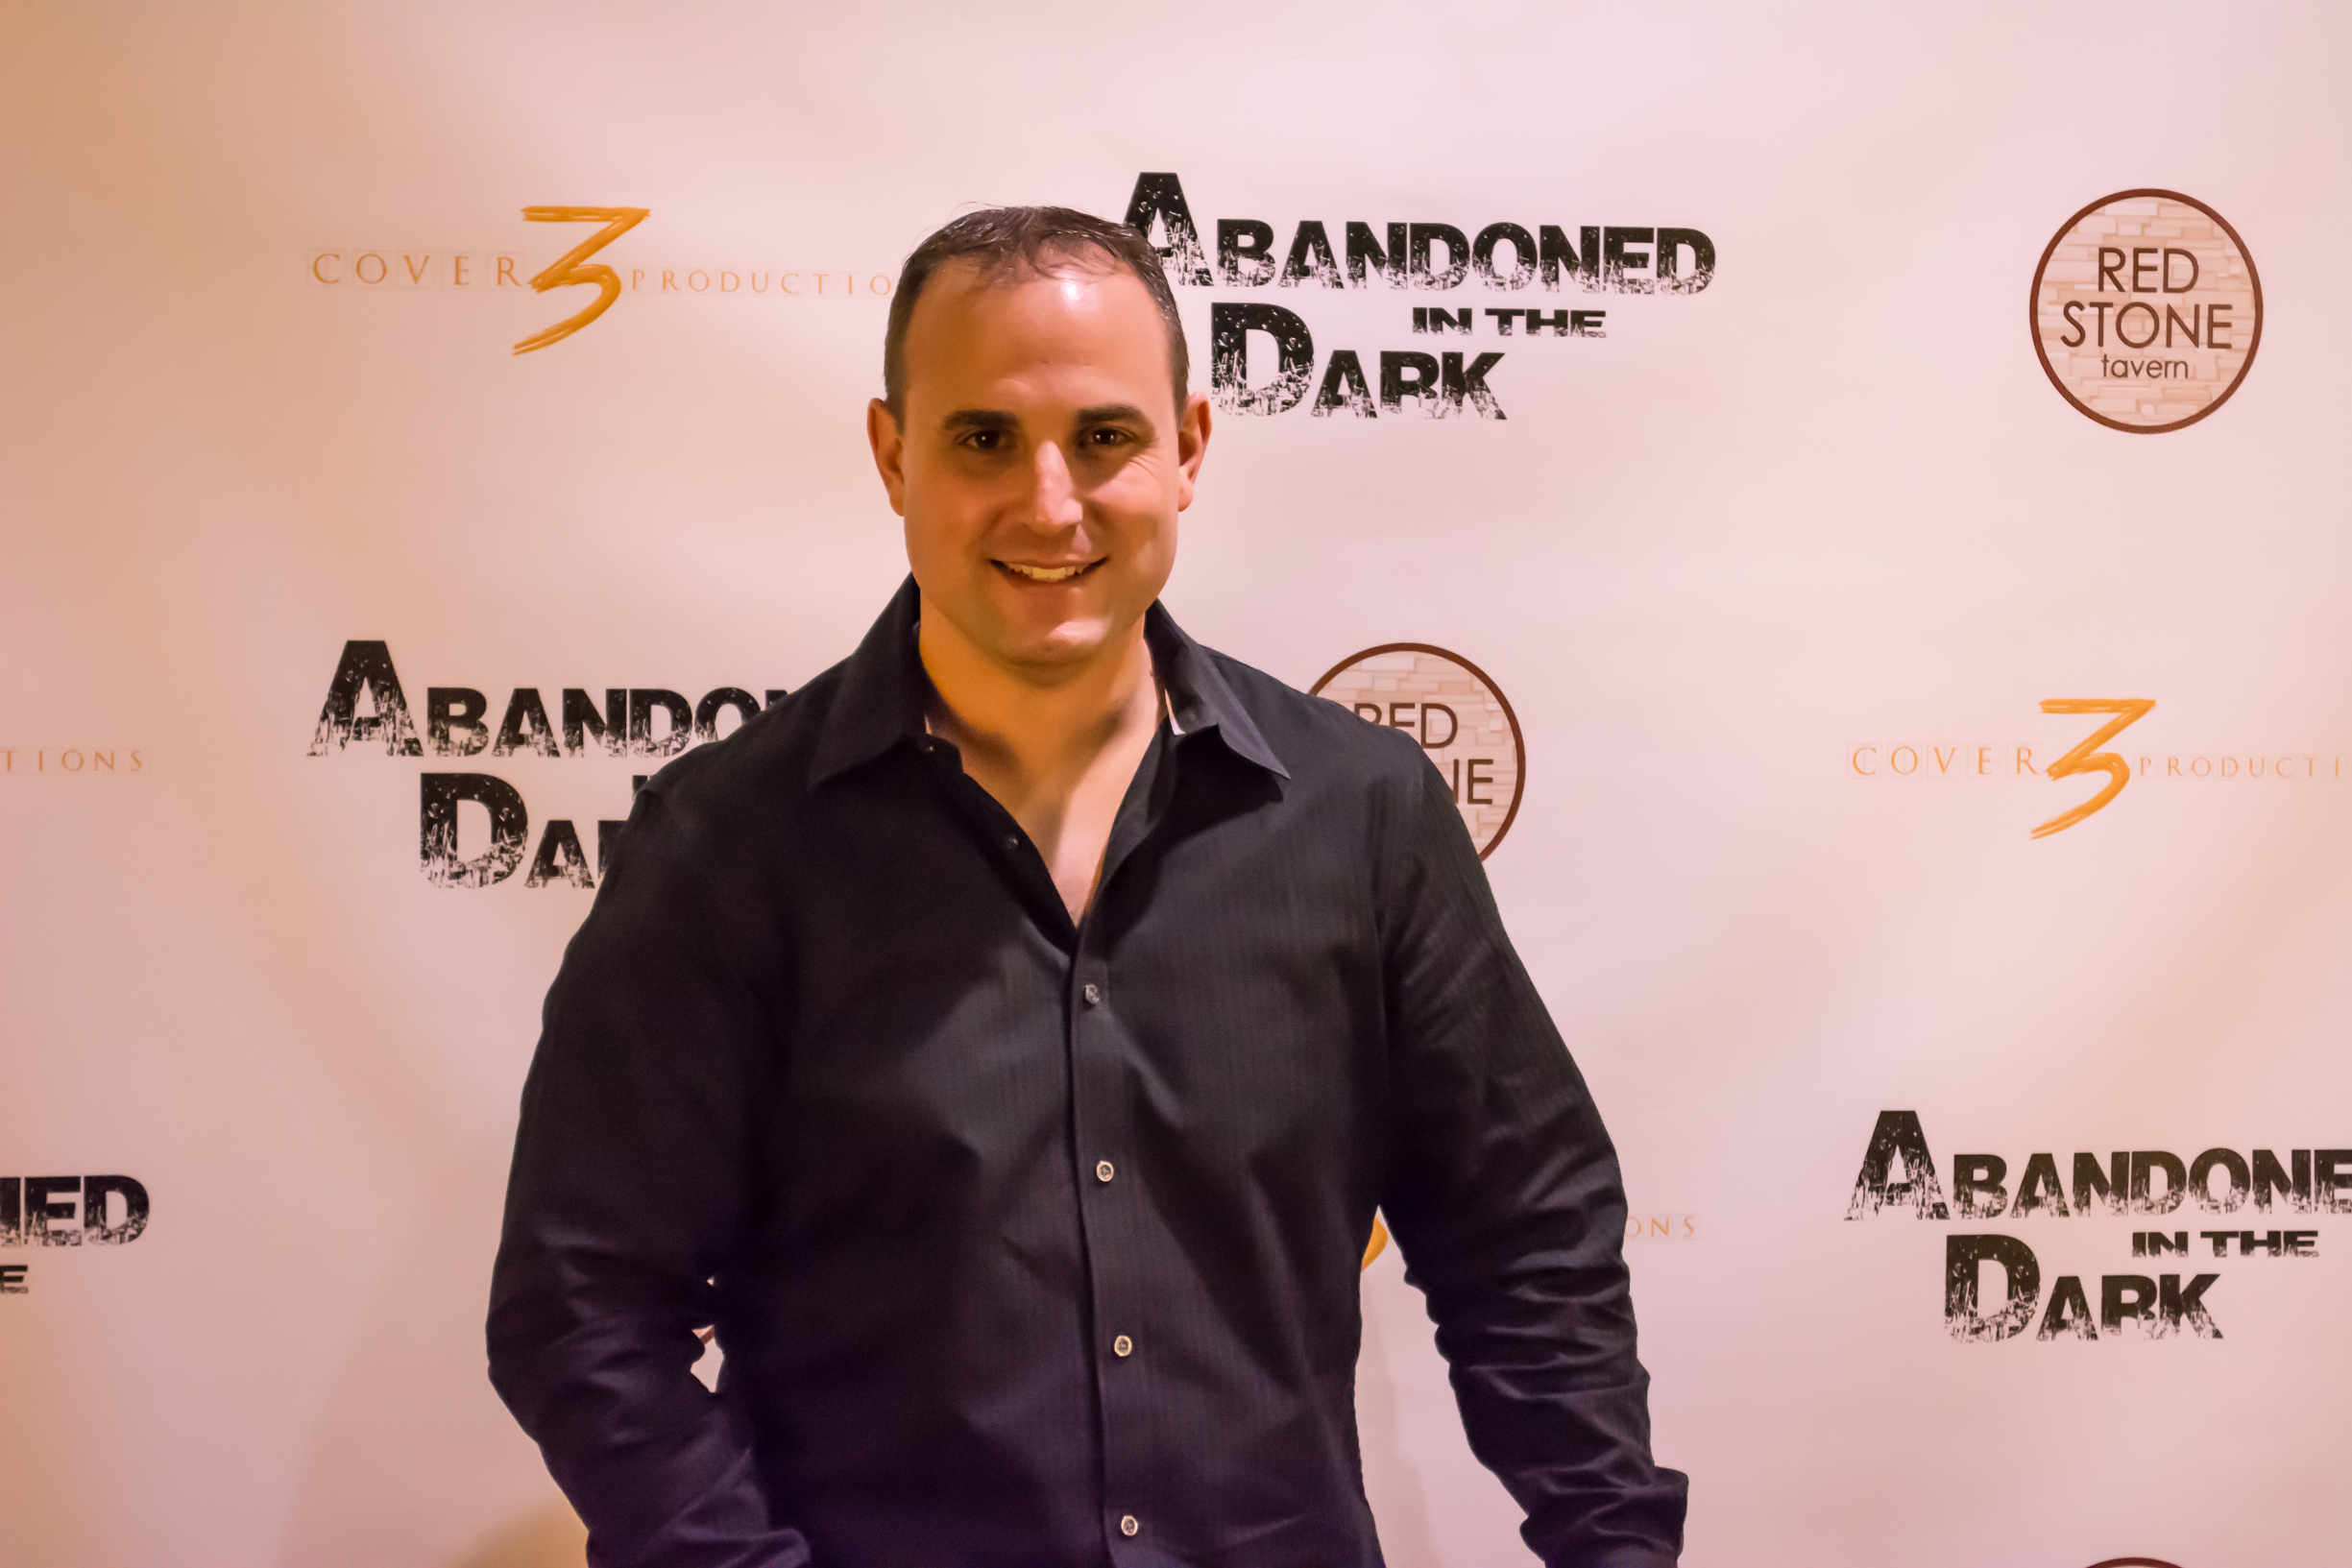 Mike Lordi at the premiere of ABANDONED IN THE DARK (2014).